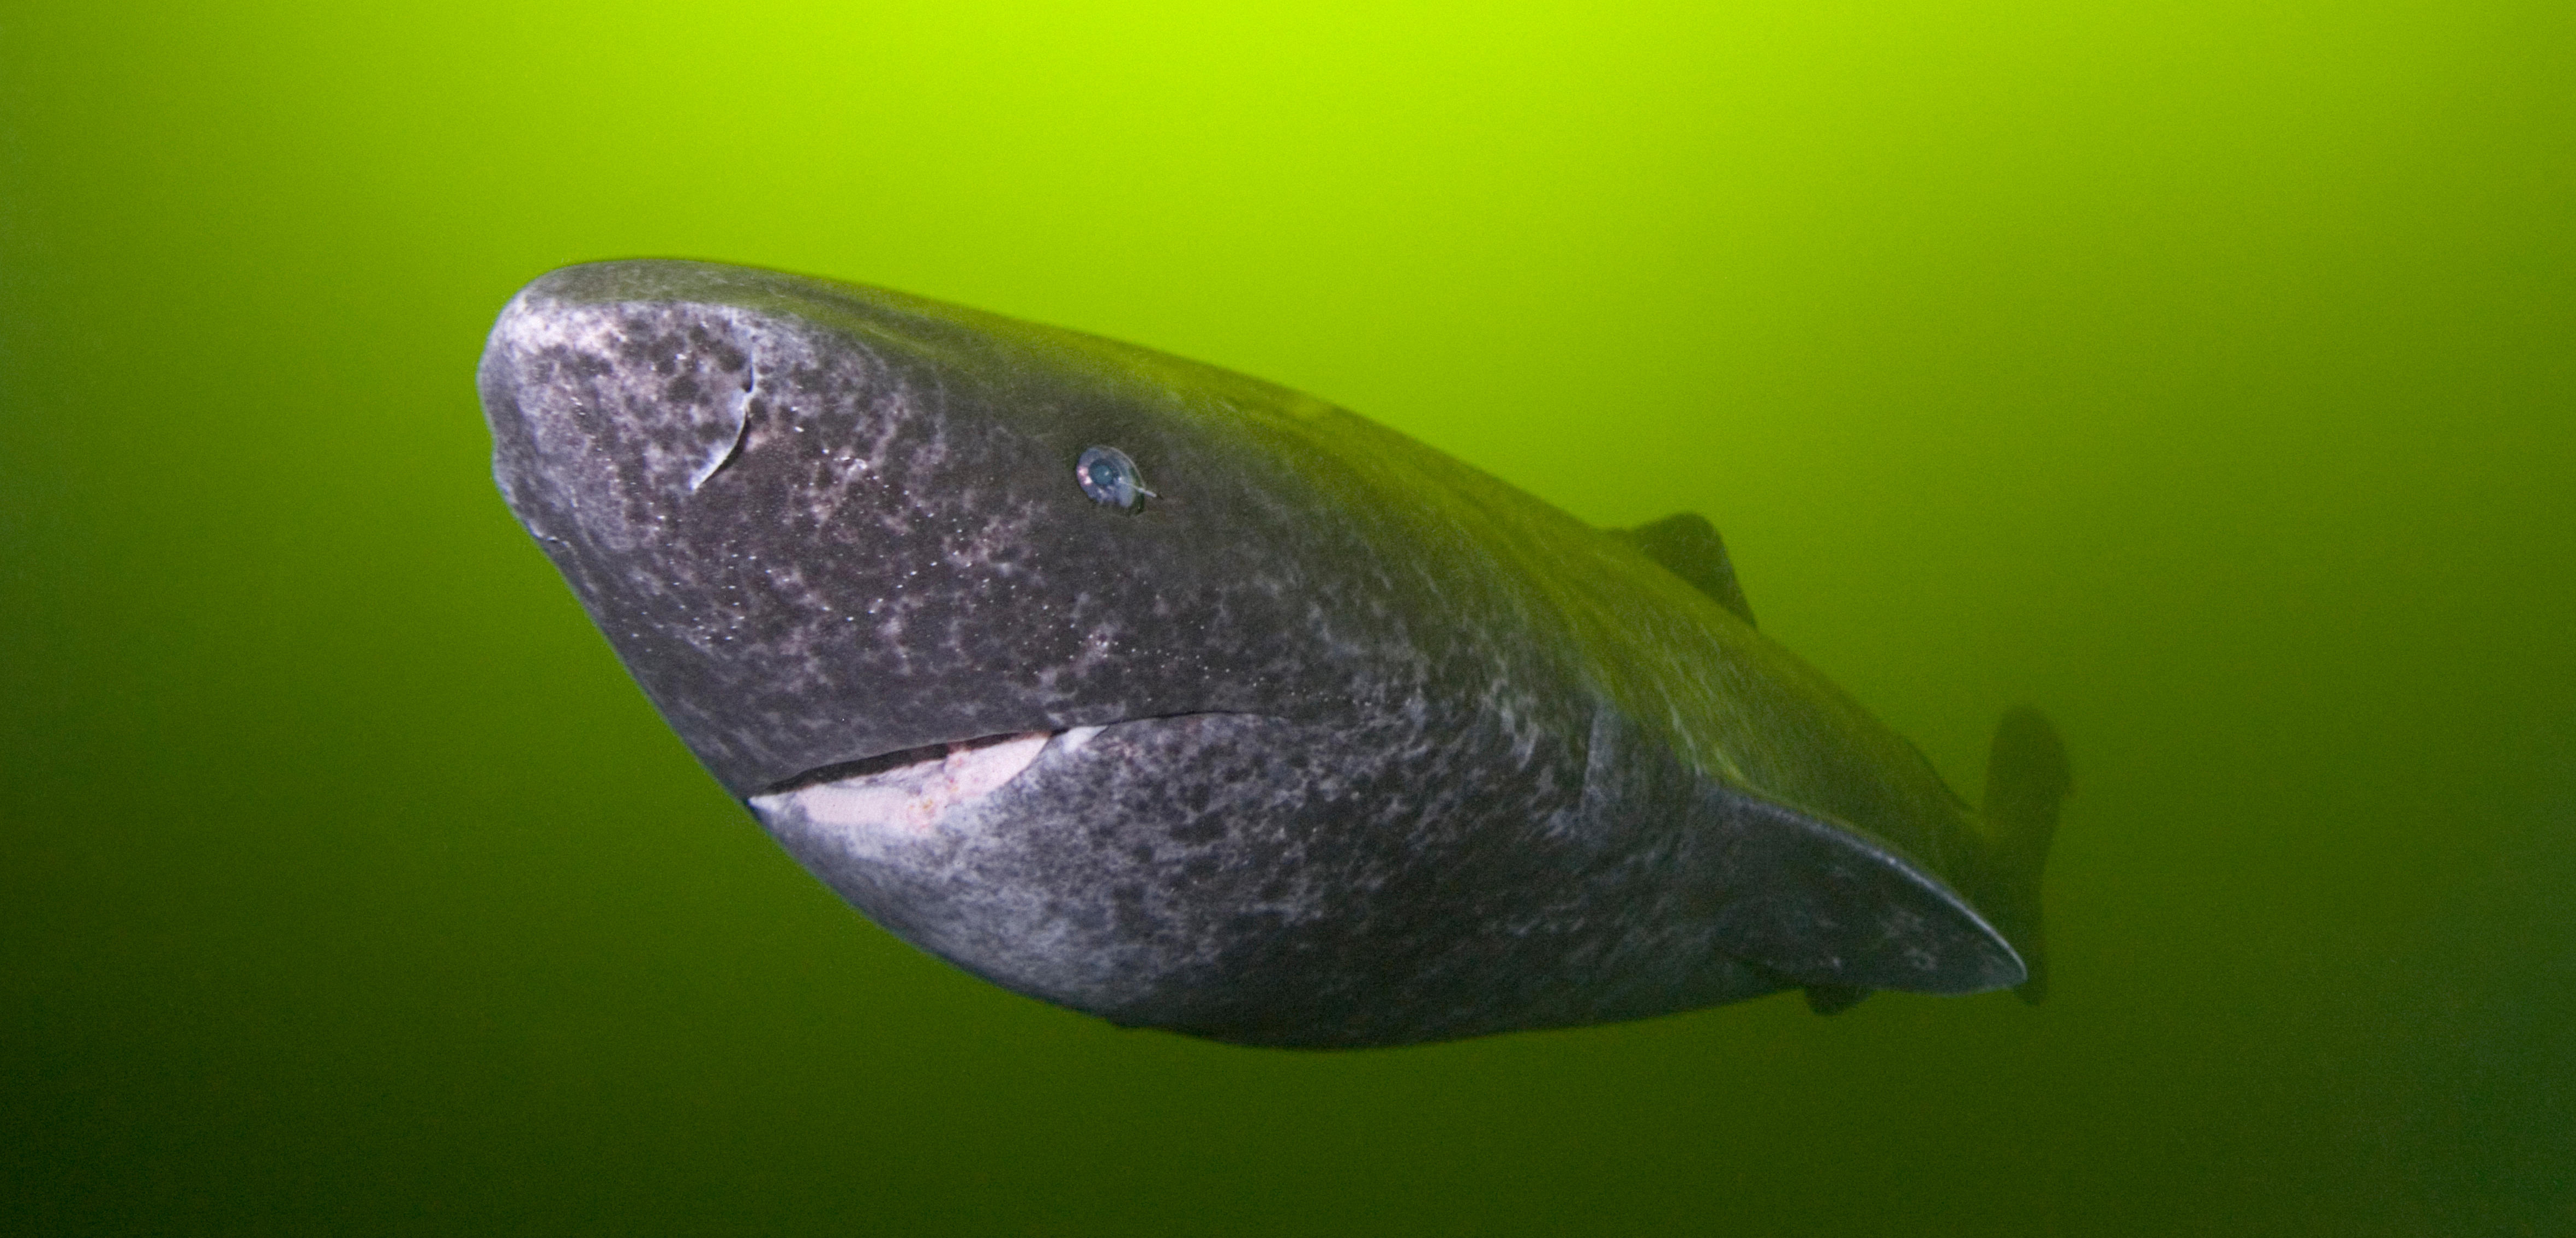 Recent research revealed that the Greenland shark can live for hundreds of years. Photo by Nature Picture Library/Alamy Stock Photo